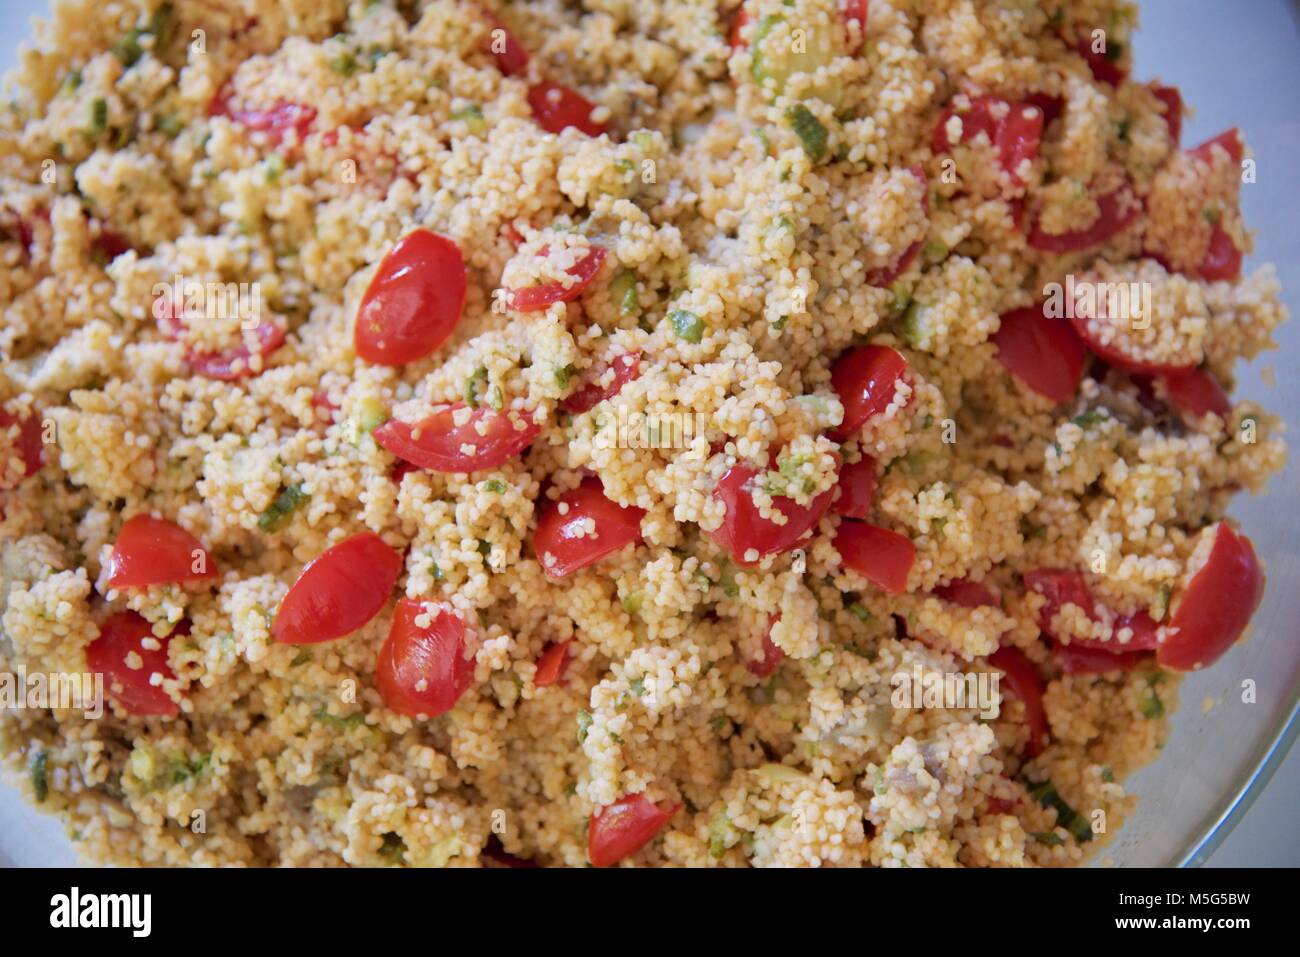 Cous cous plate Stock Photo